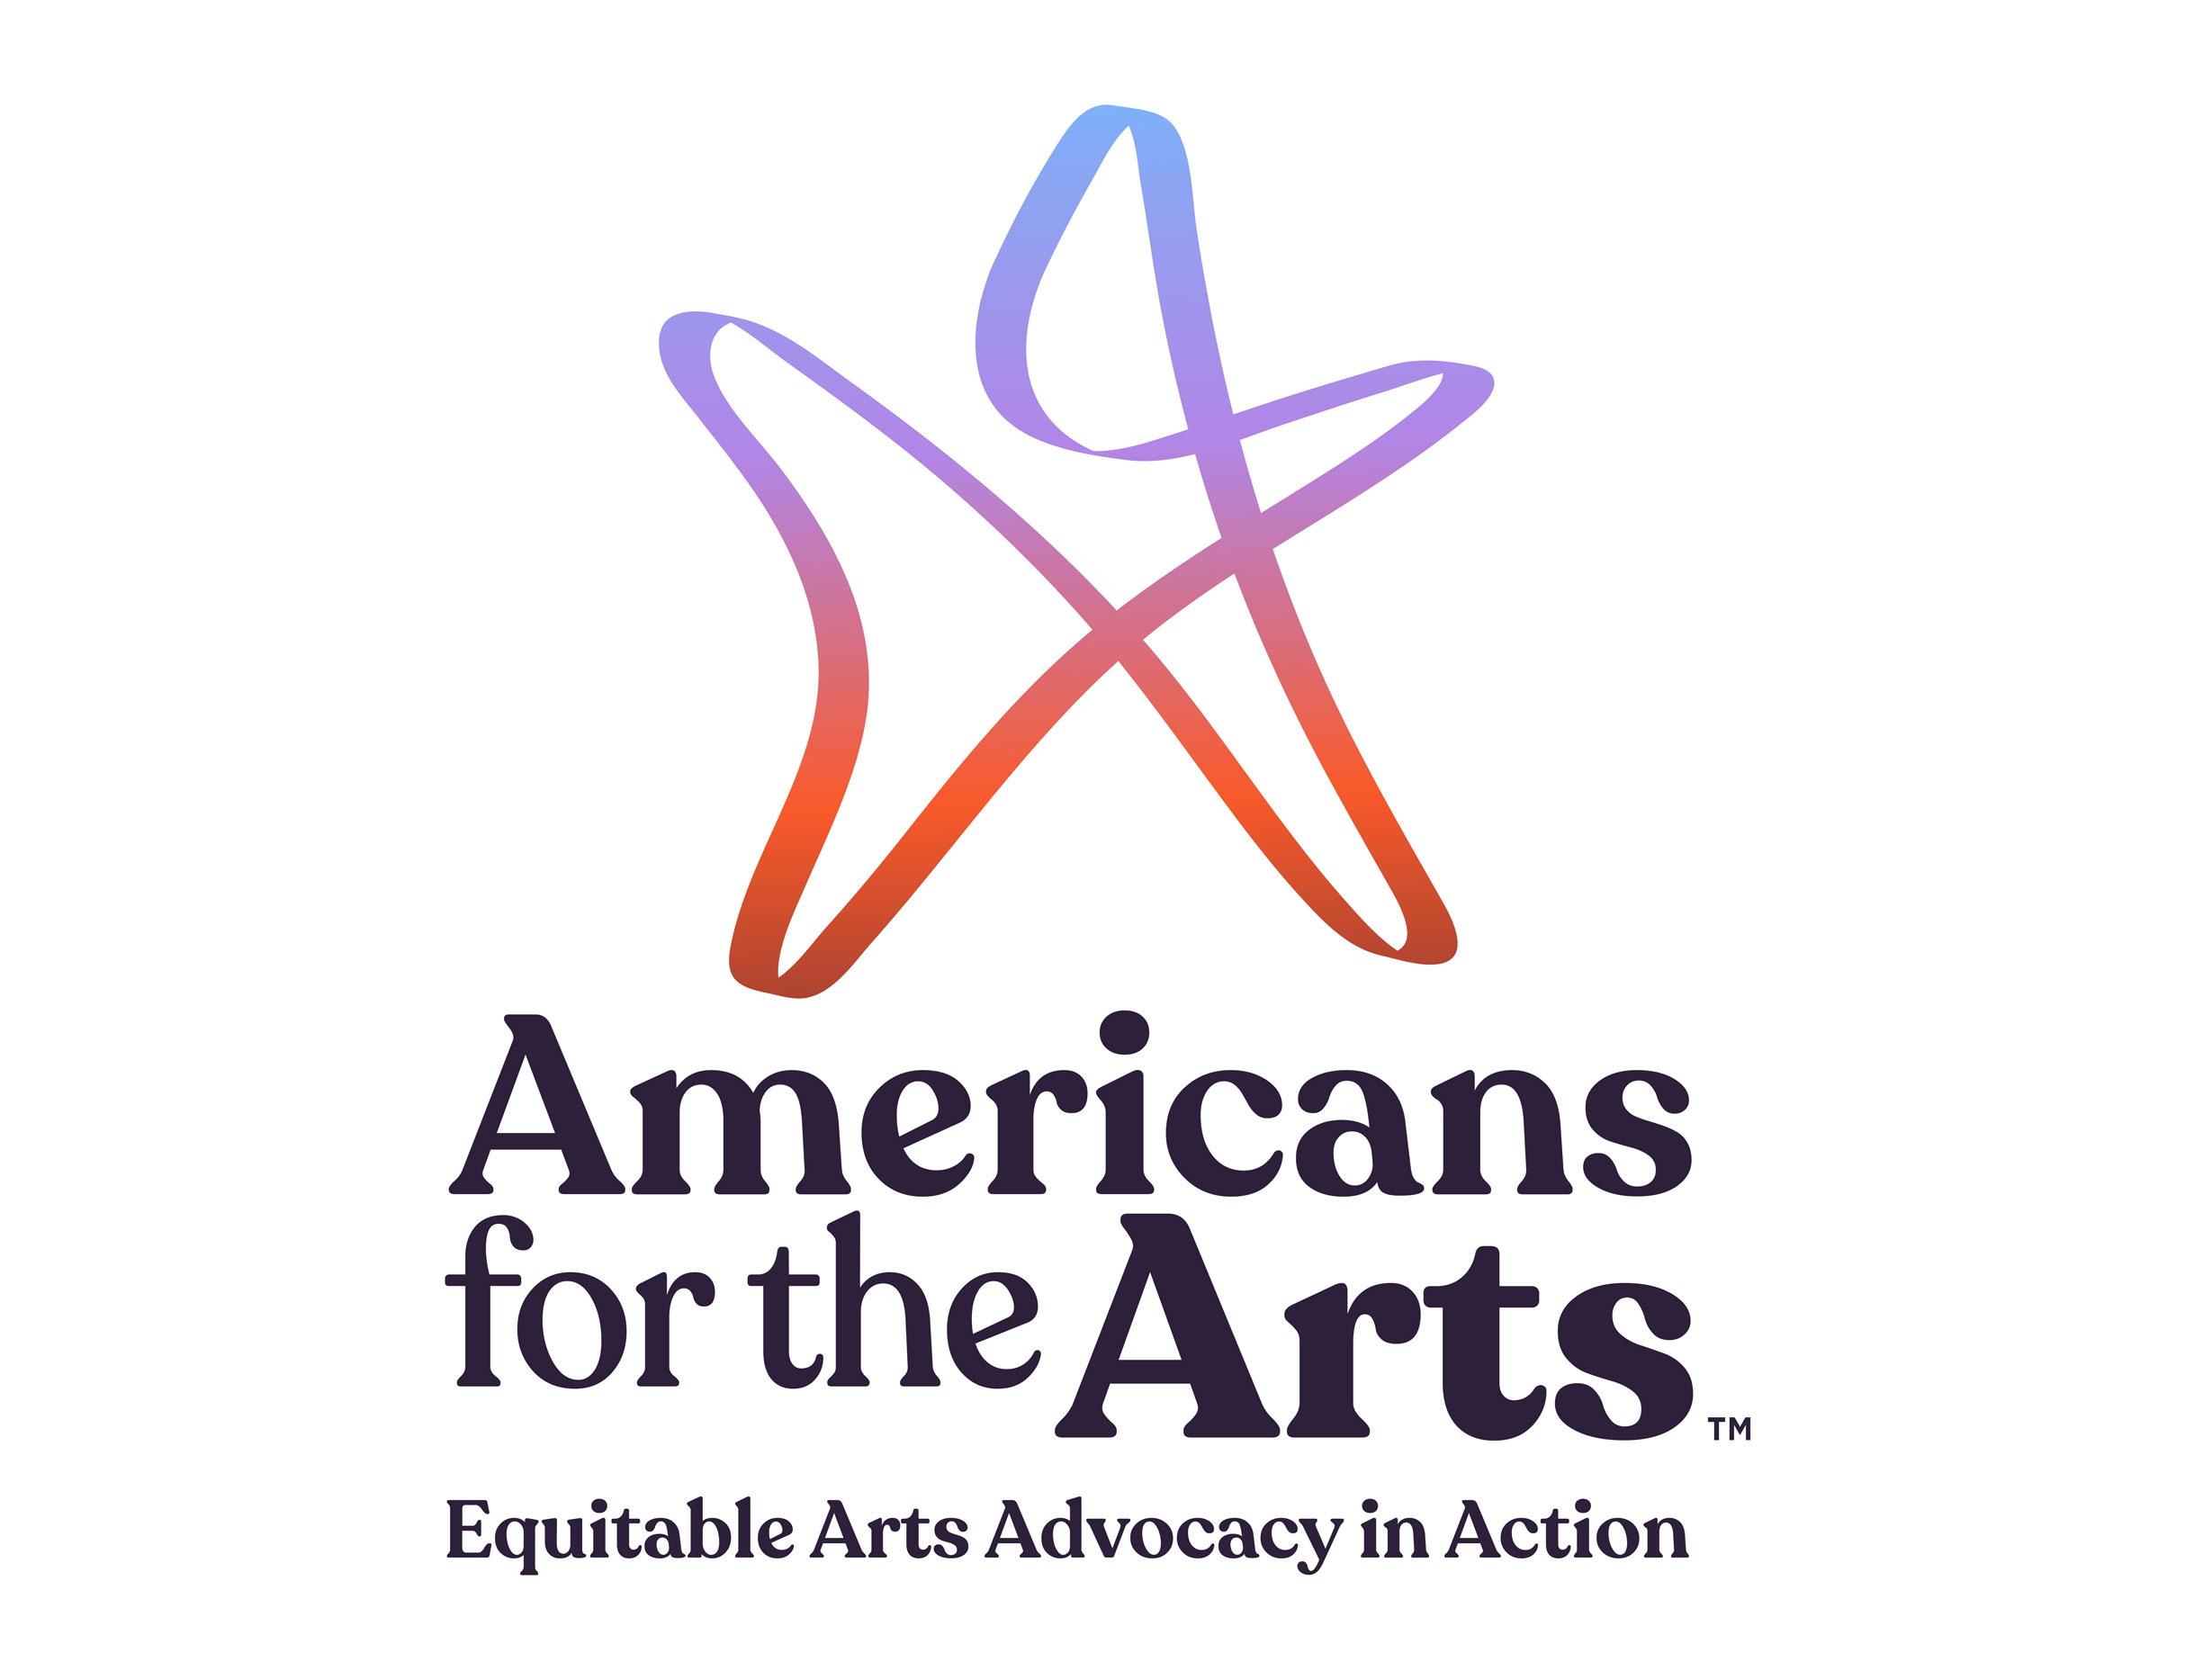 Americans for the Arts. Equitable Arts Advocacy in Action.